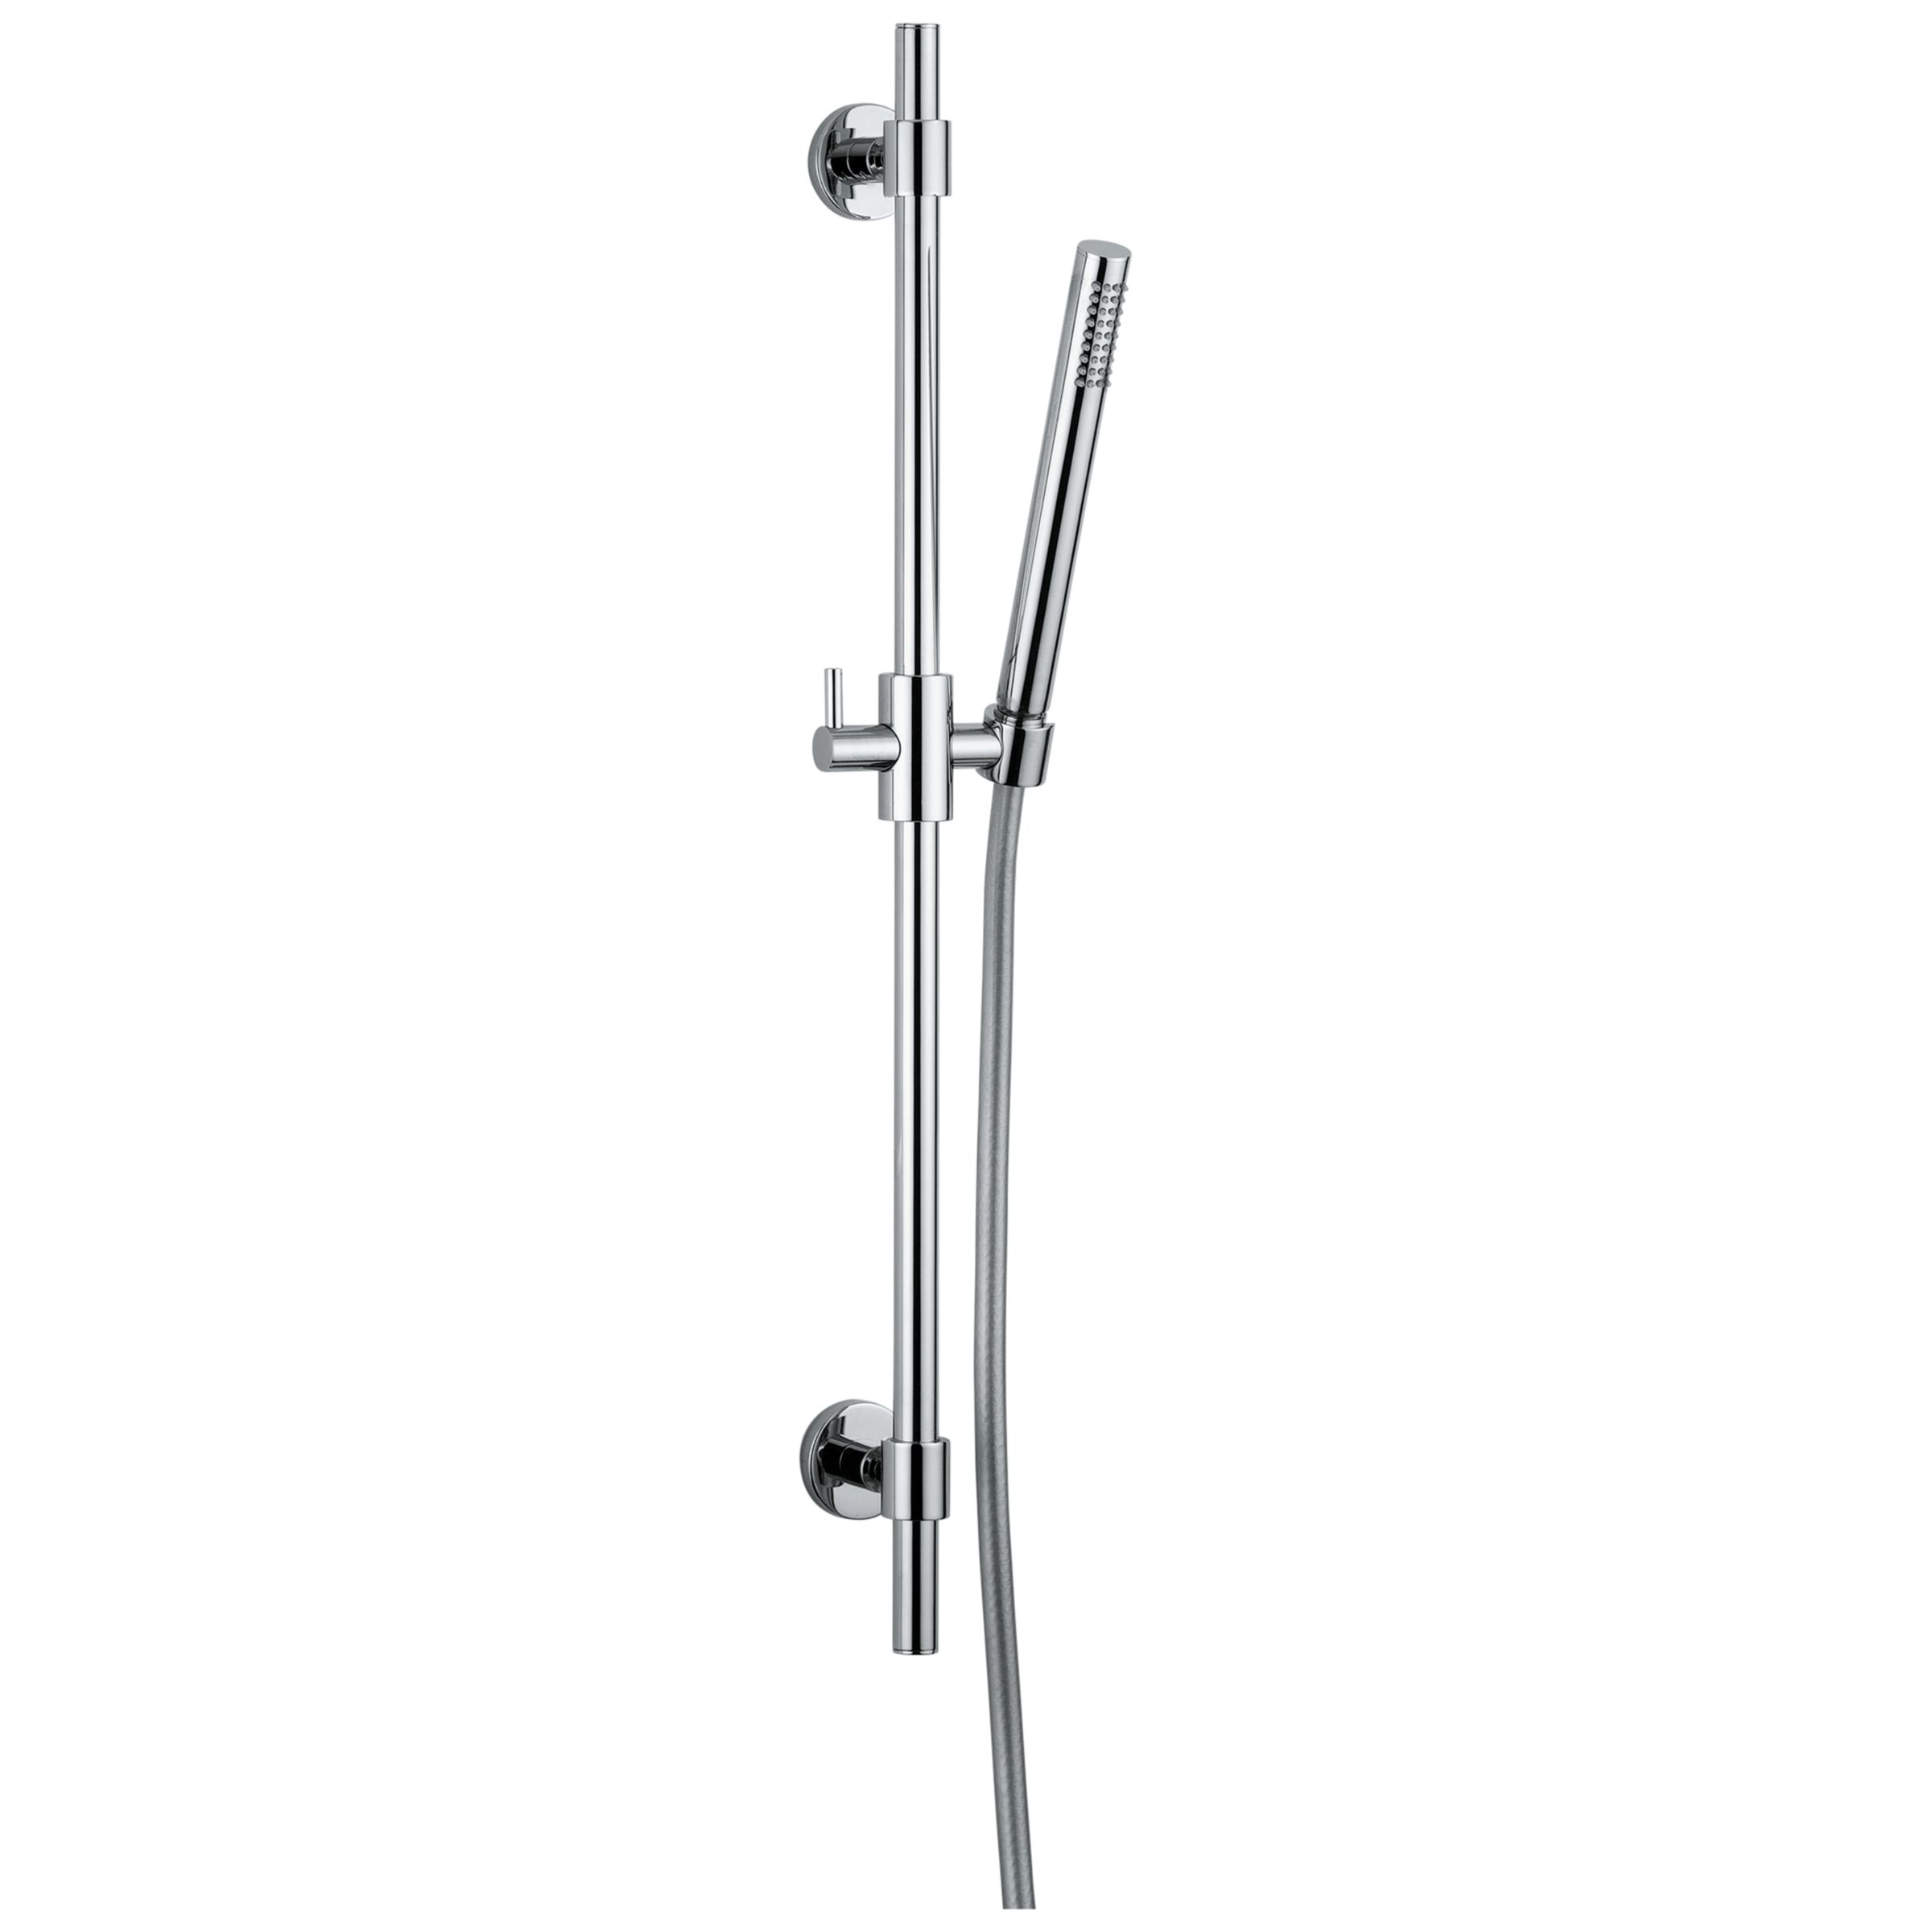 Abode Euphoria Square Rising Rail Shower Kit with Pencil Showerhead, H700mm